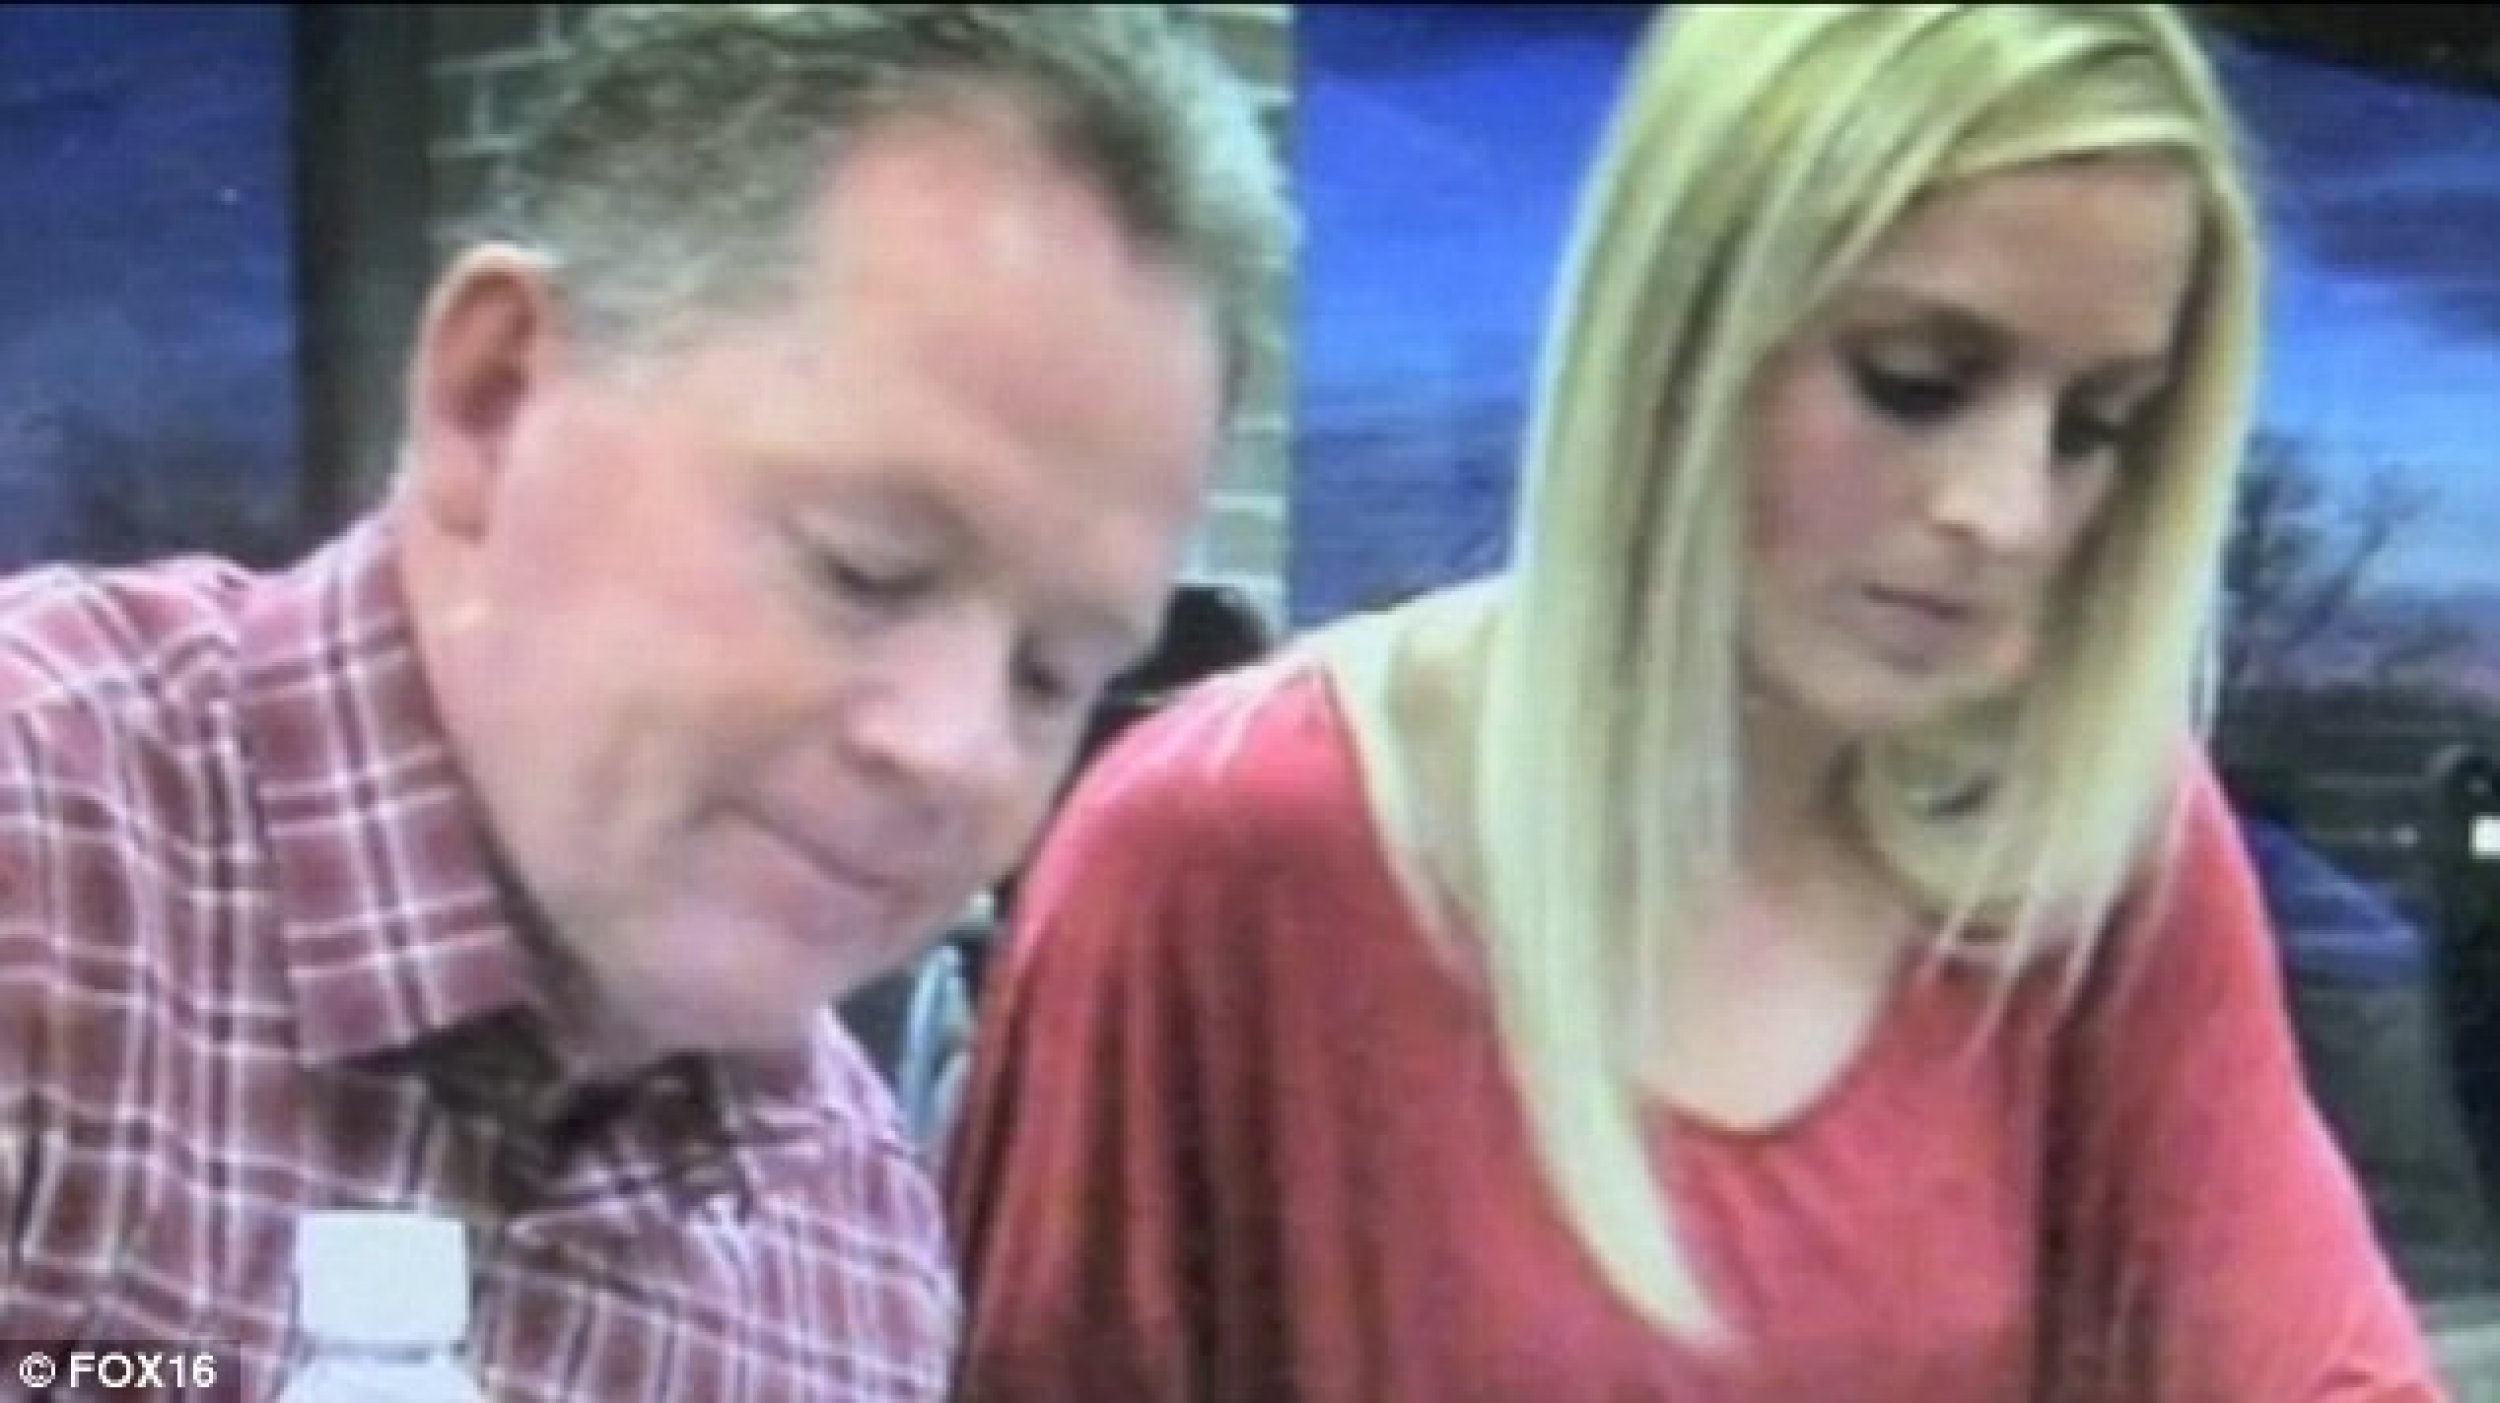 Petrino and Dorrell together at a signing event just before the scandal broke.